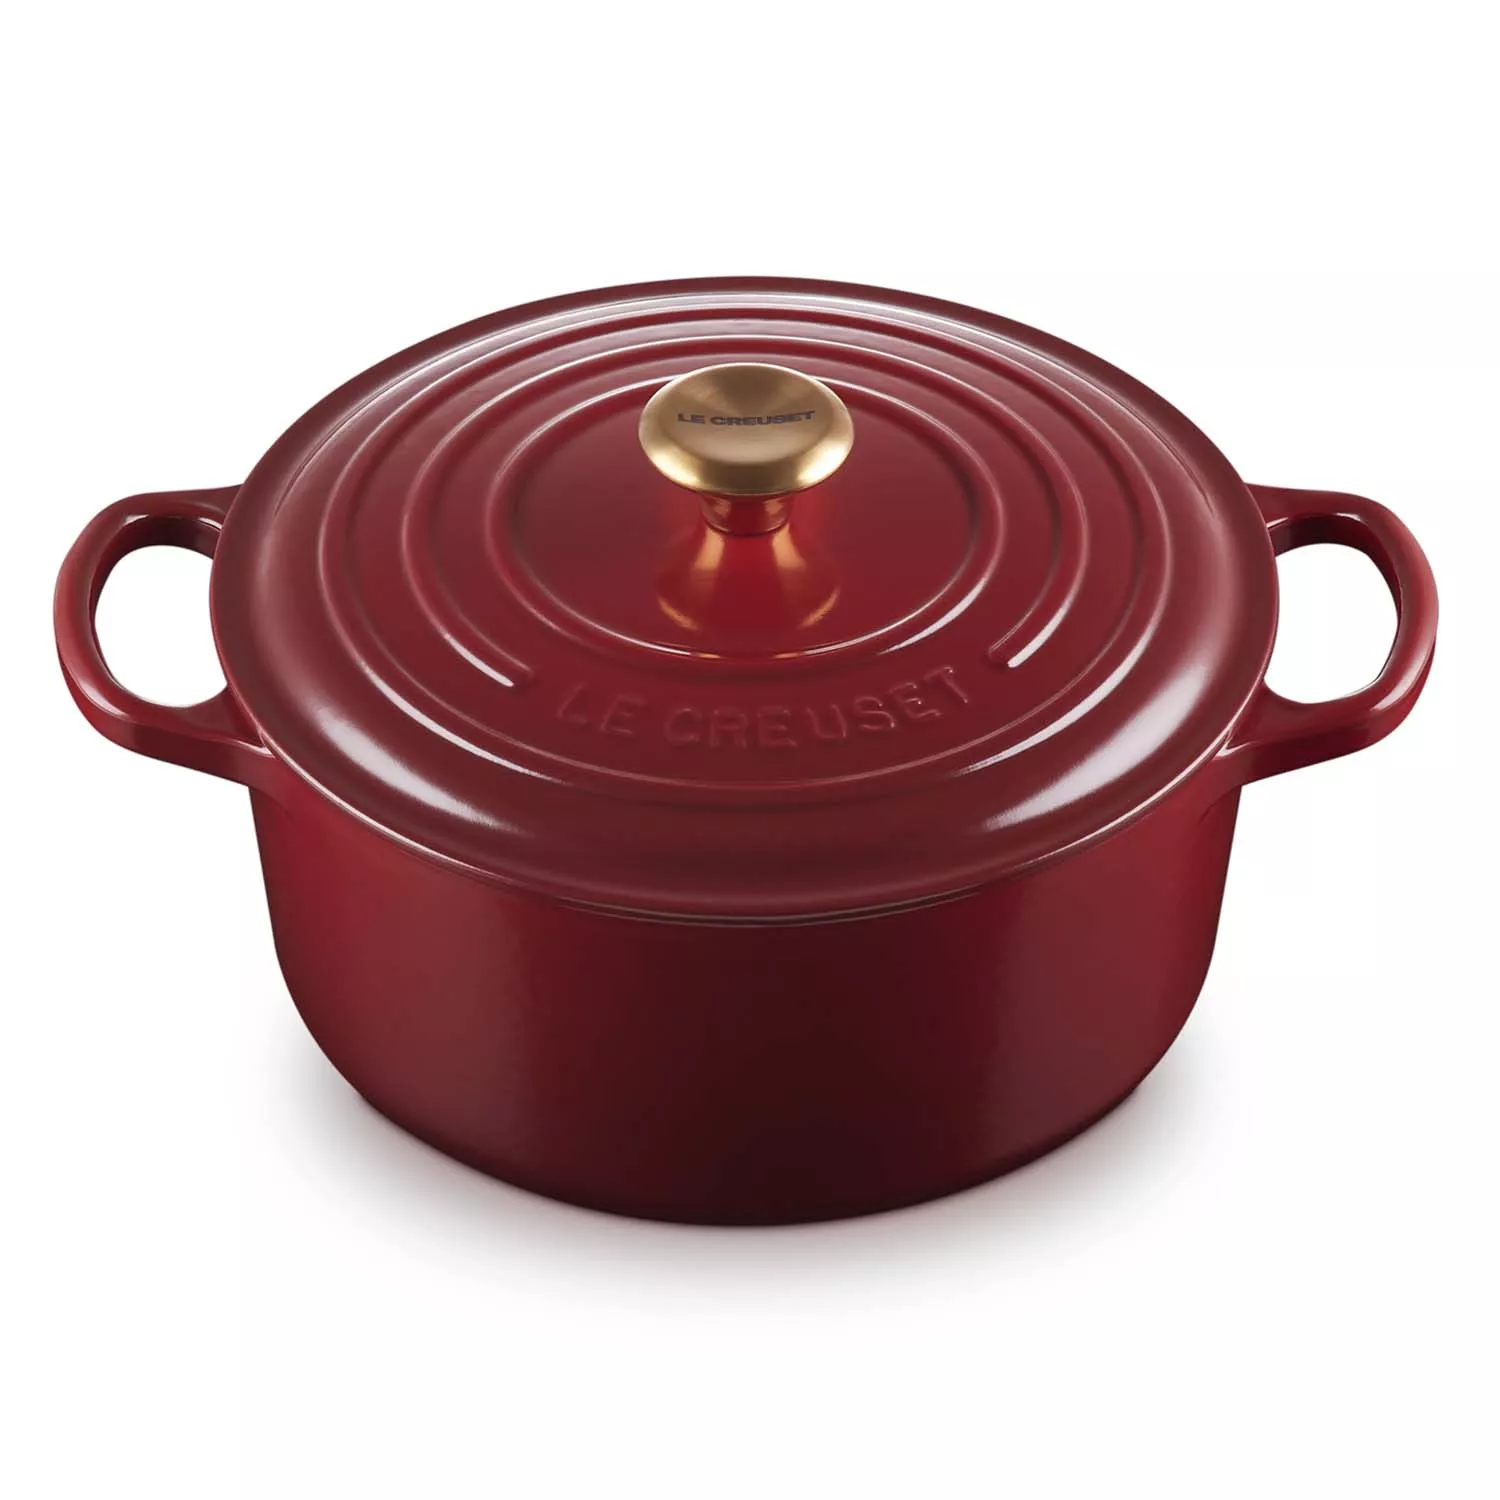 Le Creuset 3.5 Quart Round Dutch Oven — Review and Information